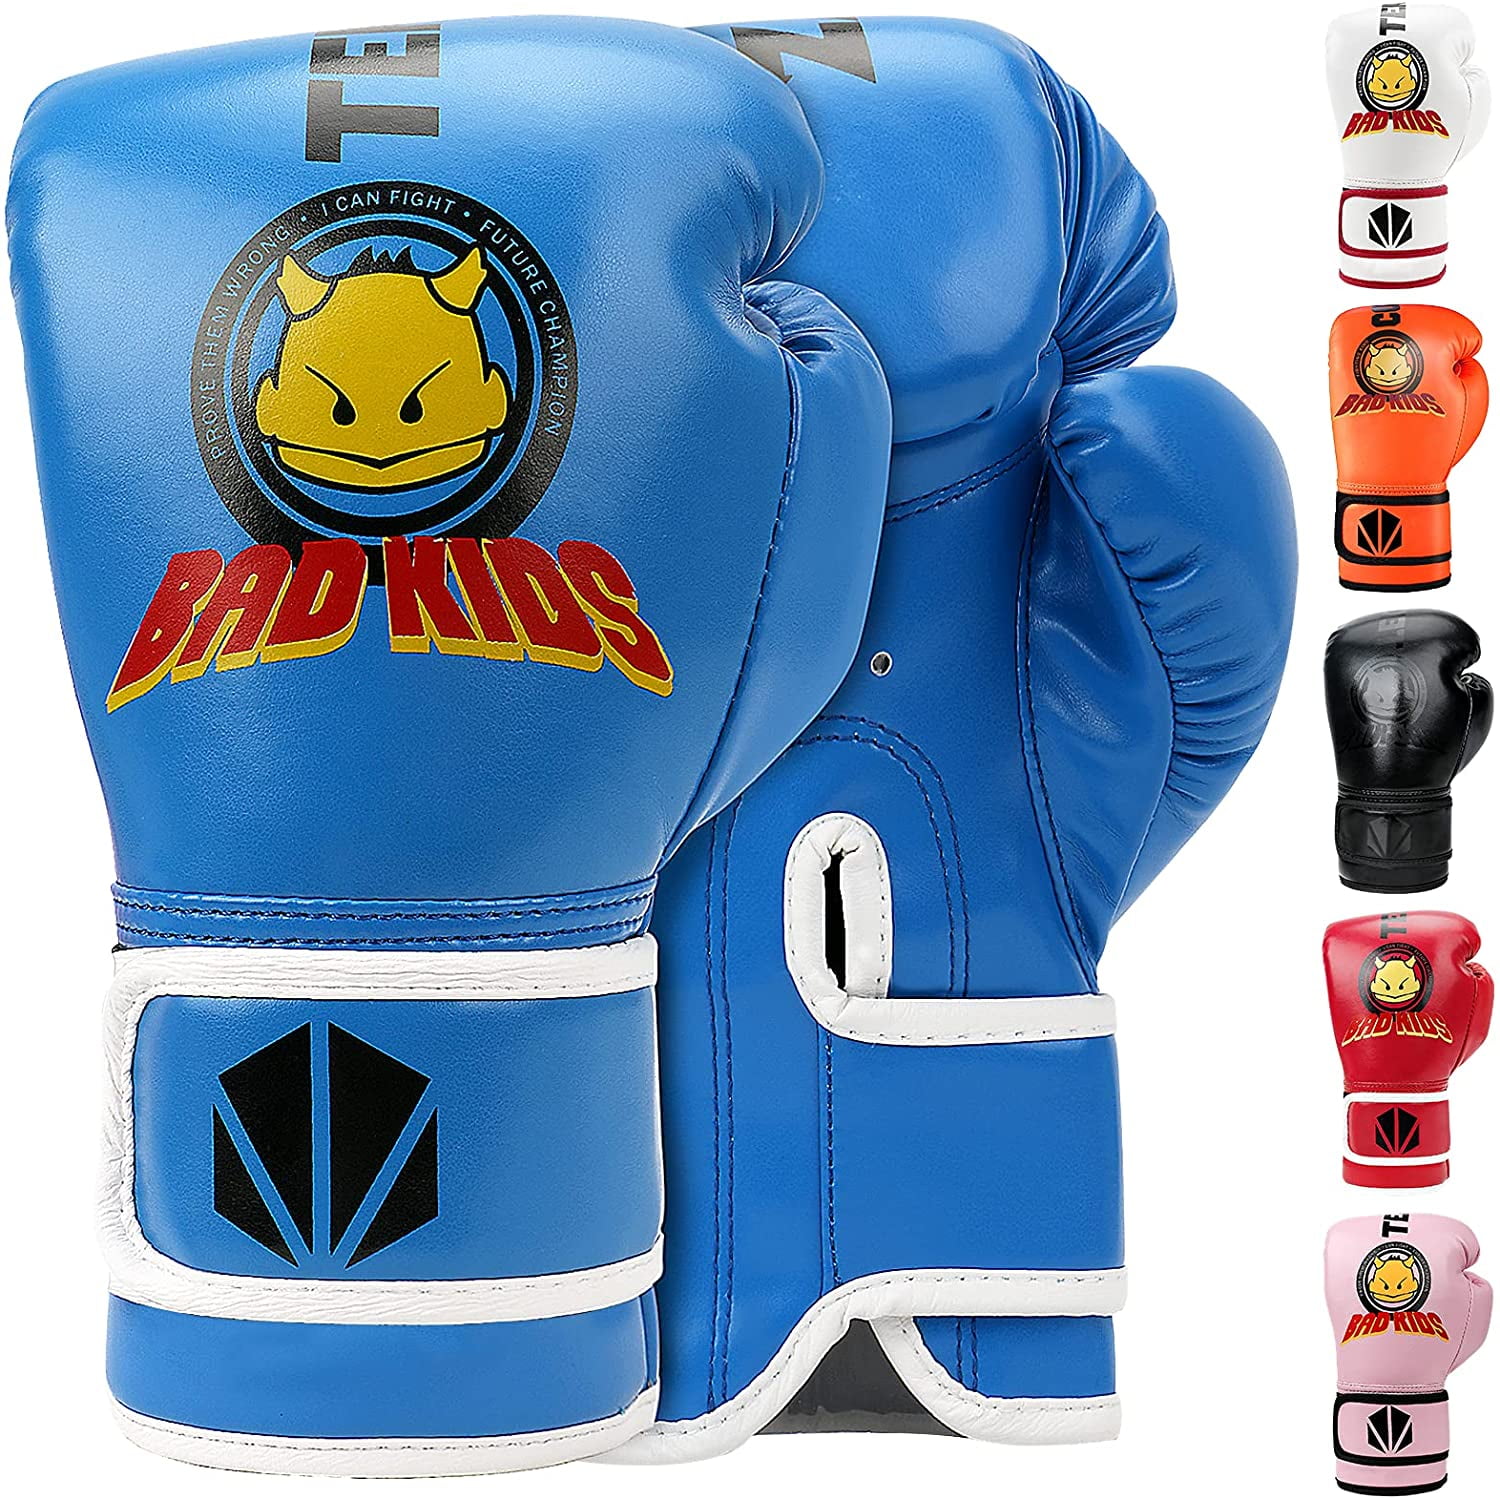 Lions Kids Boxing Gloves 4oz 6oz 8oz Sparring Martial Arts Punch Bag Training Mitts